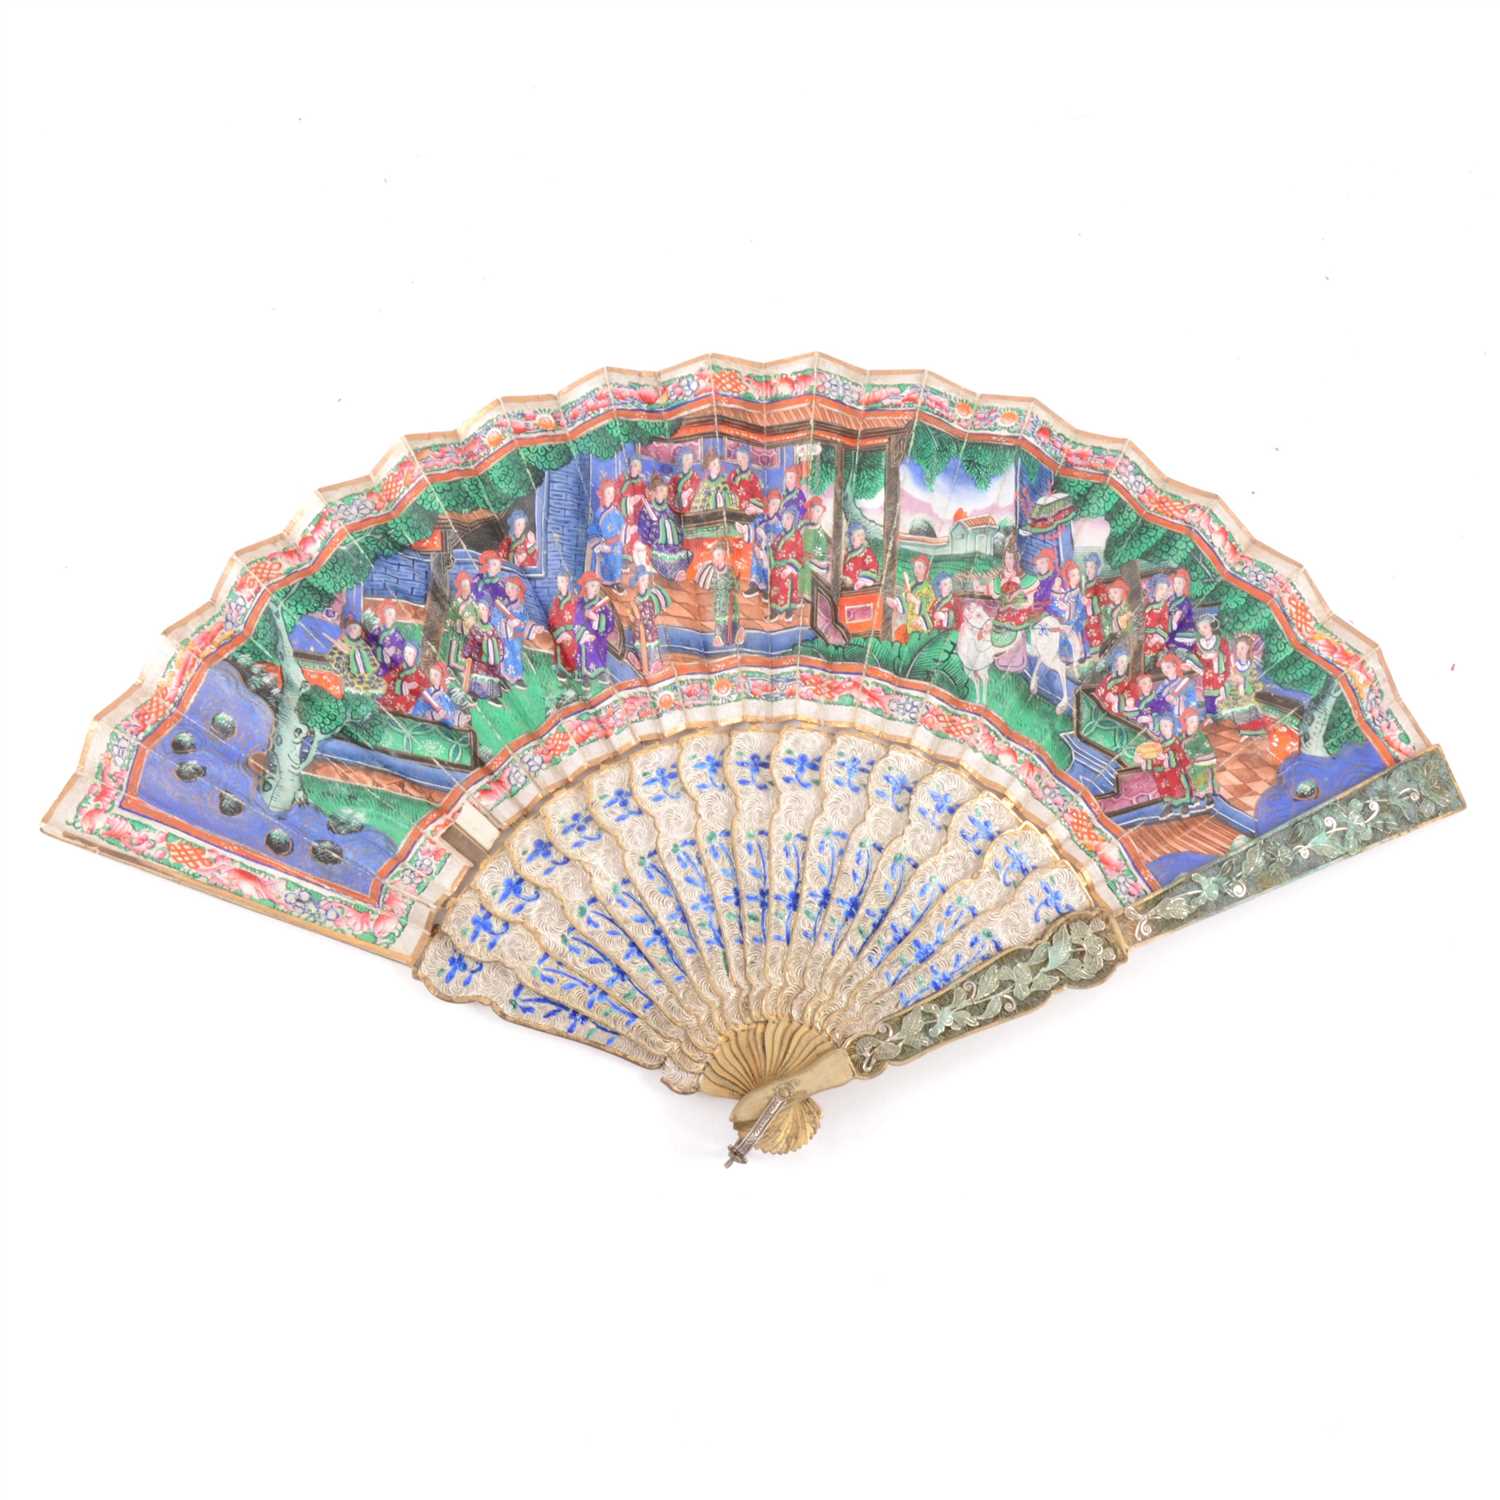 Lot 61 - Cantonese white and gilt metal fan, mid 19th century